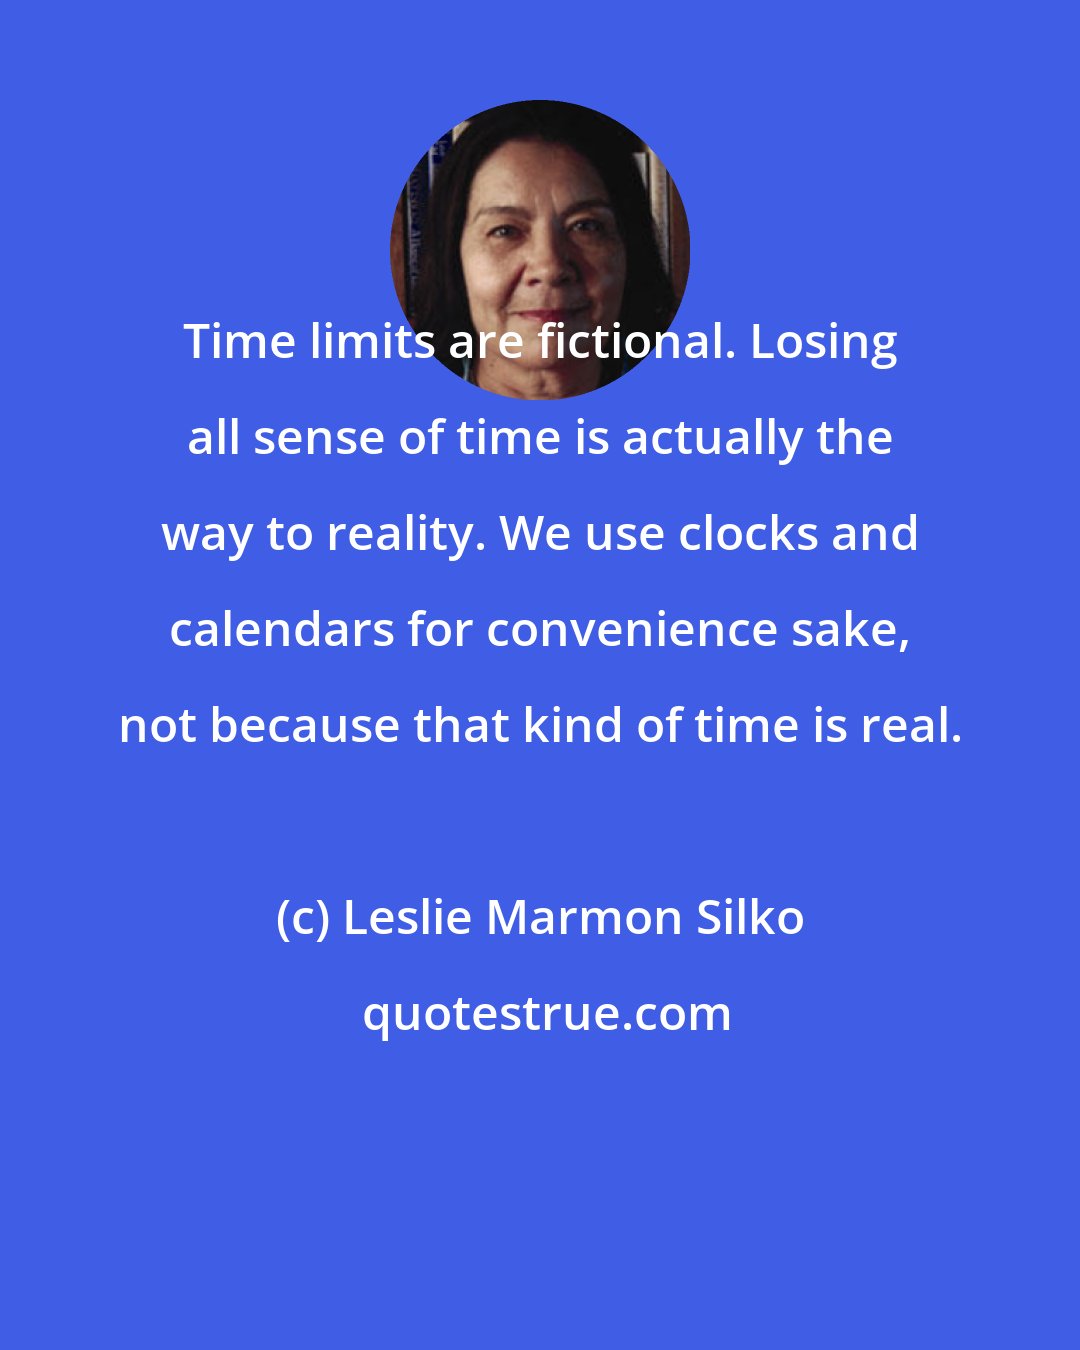 Leslie Marmon Silko: Time limits are fictional. Losing all sense of time is actually the way to reality. We use clocks and calendars for convenience sake, not because that kind of time is real.